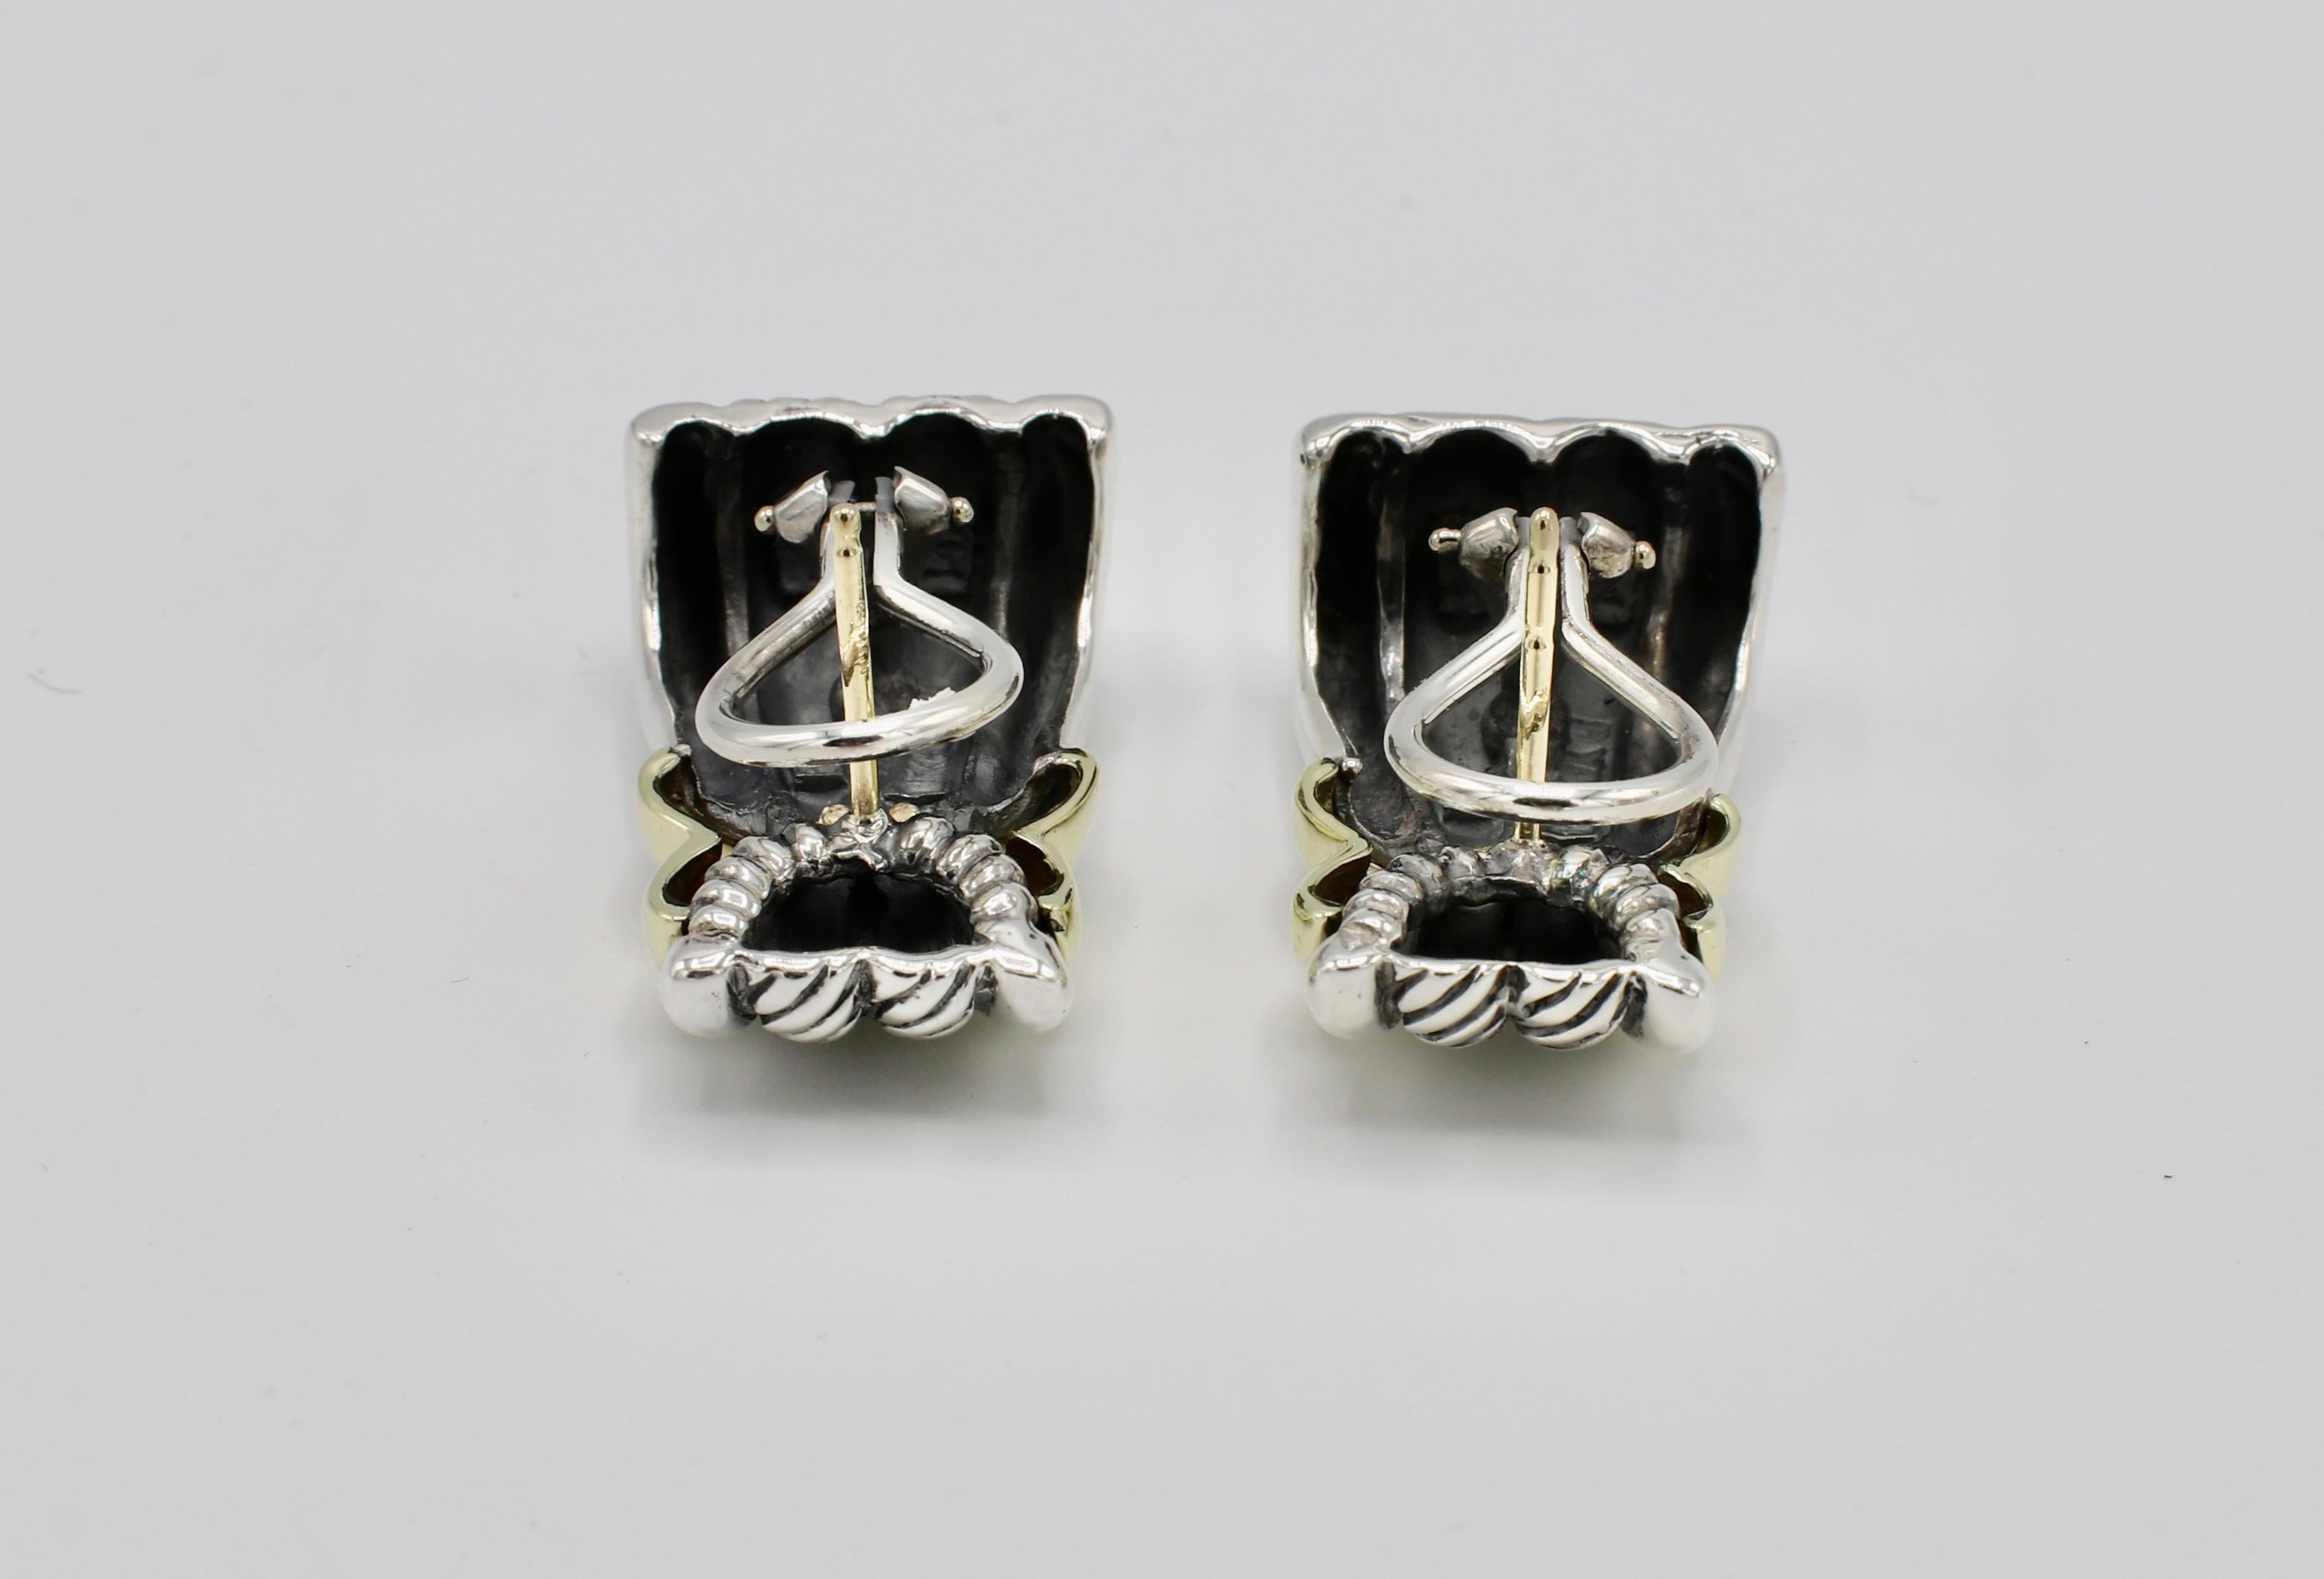 two-tone silver and gold earrings